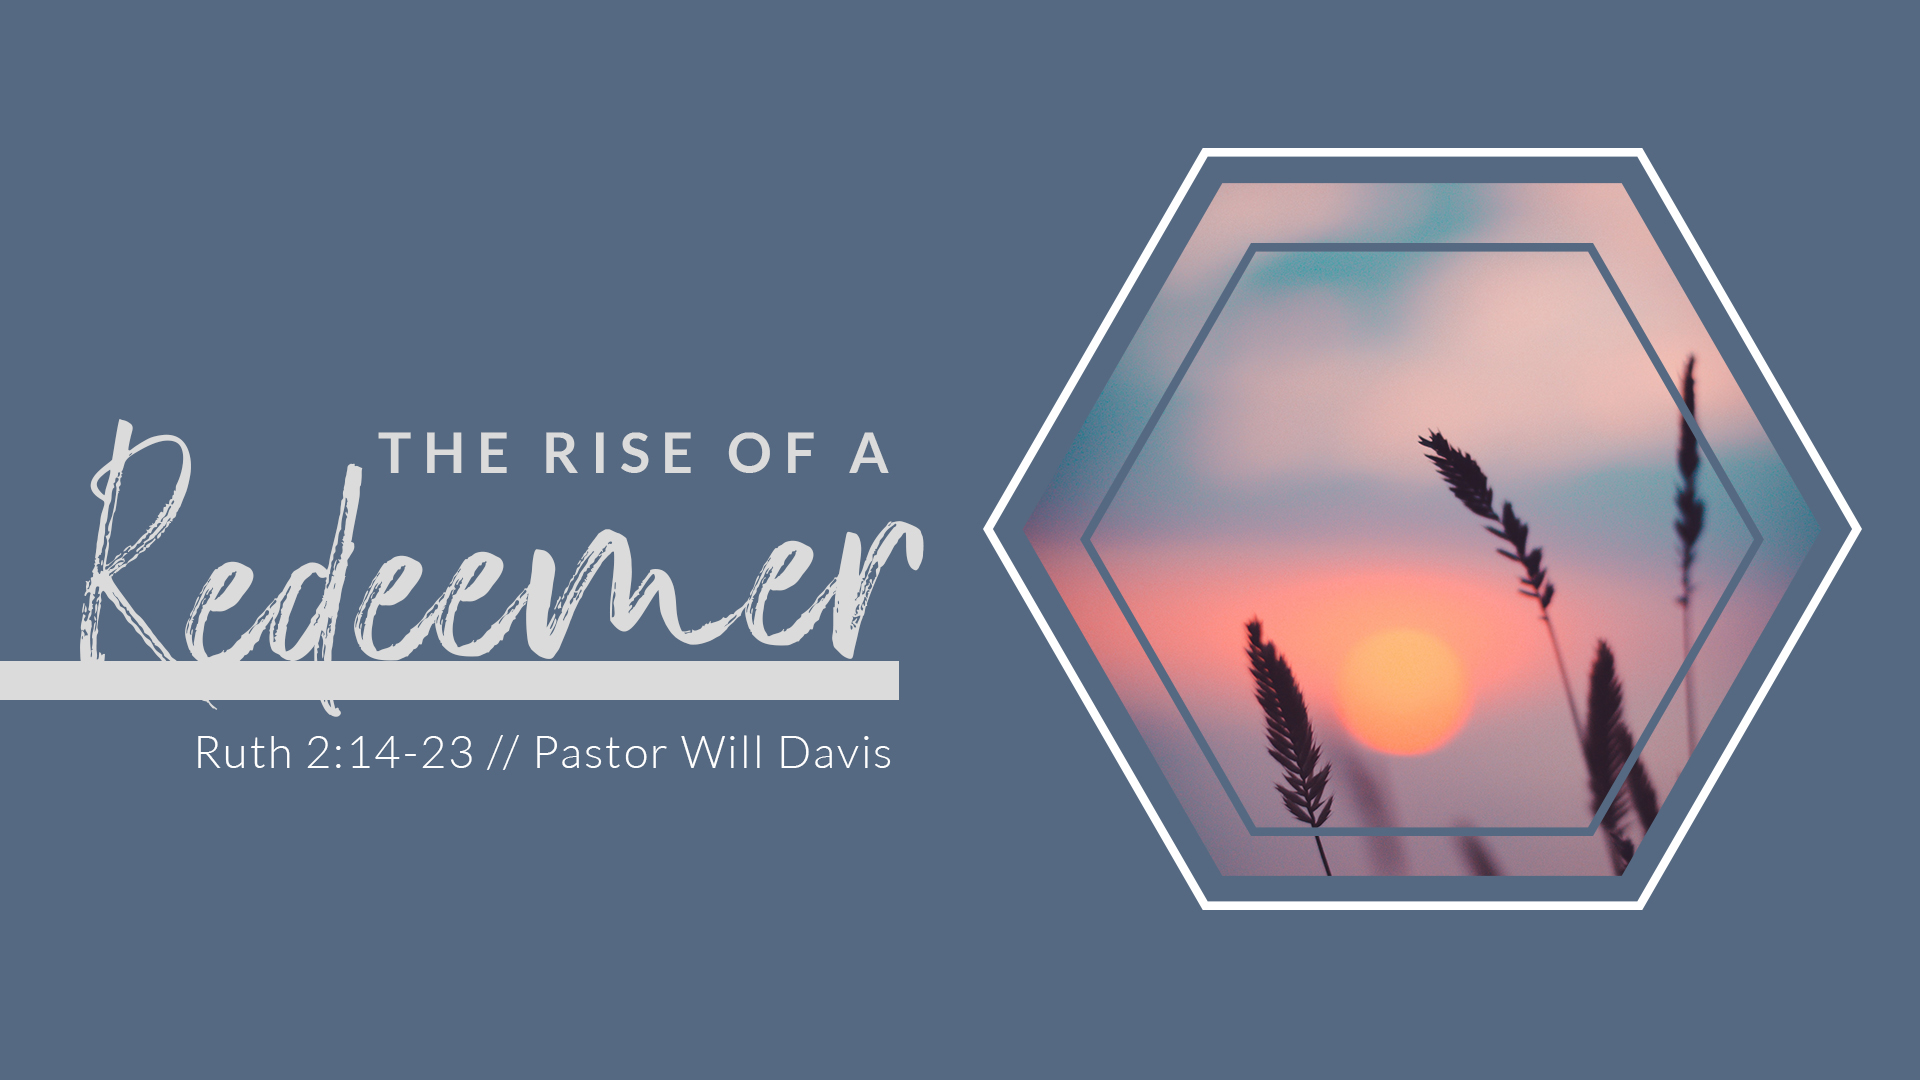 The Rise of a Redeemer